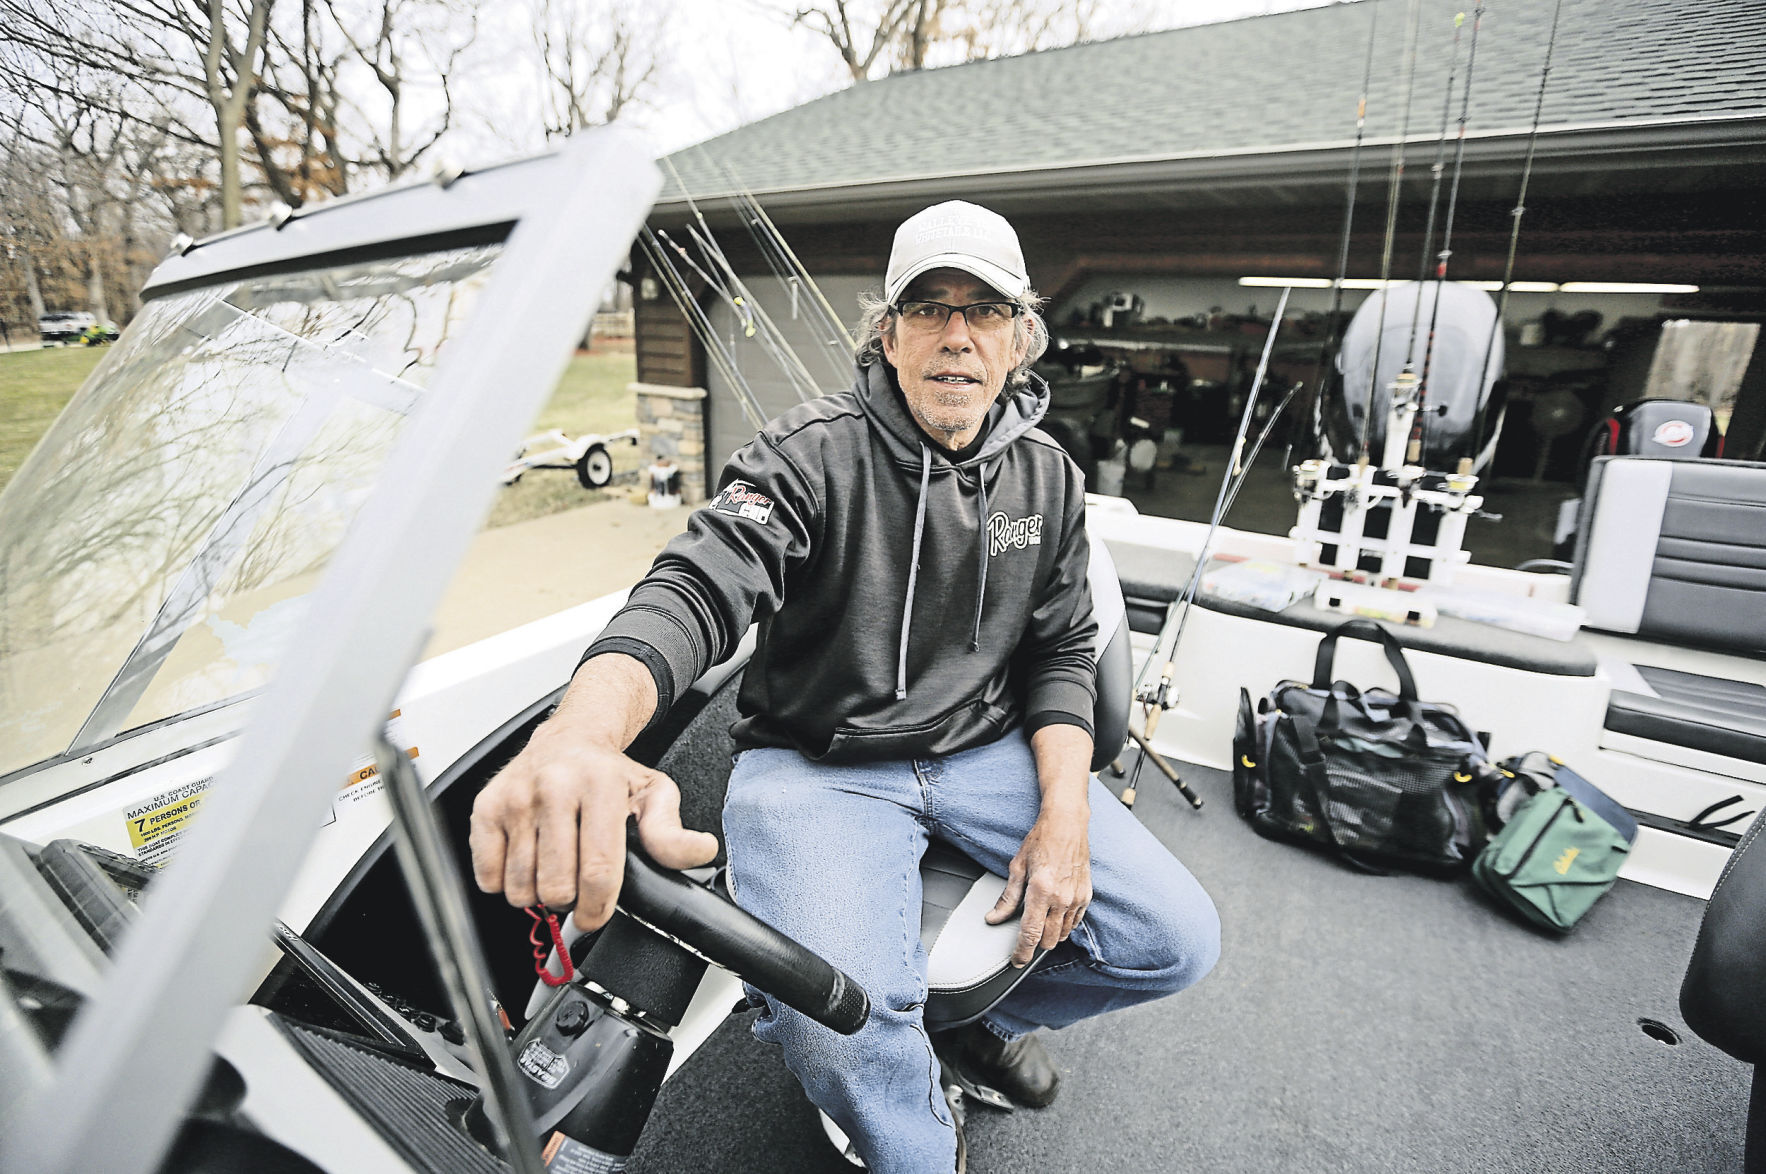 Sam Willett turned his dream into a business. He owns Walleye to Whitetails in Peosta, Iowa. He guides his clients to fishing spots on the Mississippi River and directs hunters to a site for deer and turkey hunting. PHOTO CREDIT: JESSICA REILLY